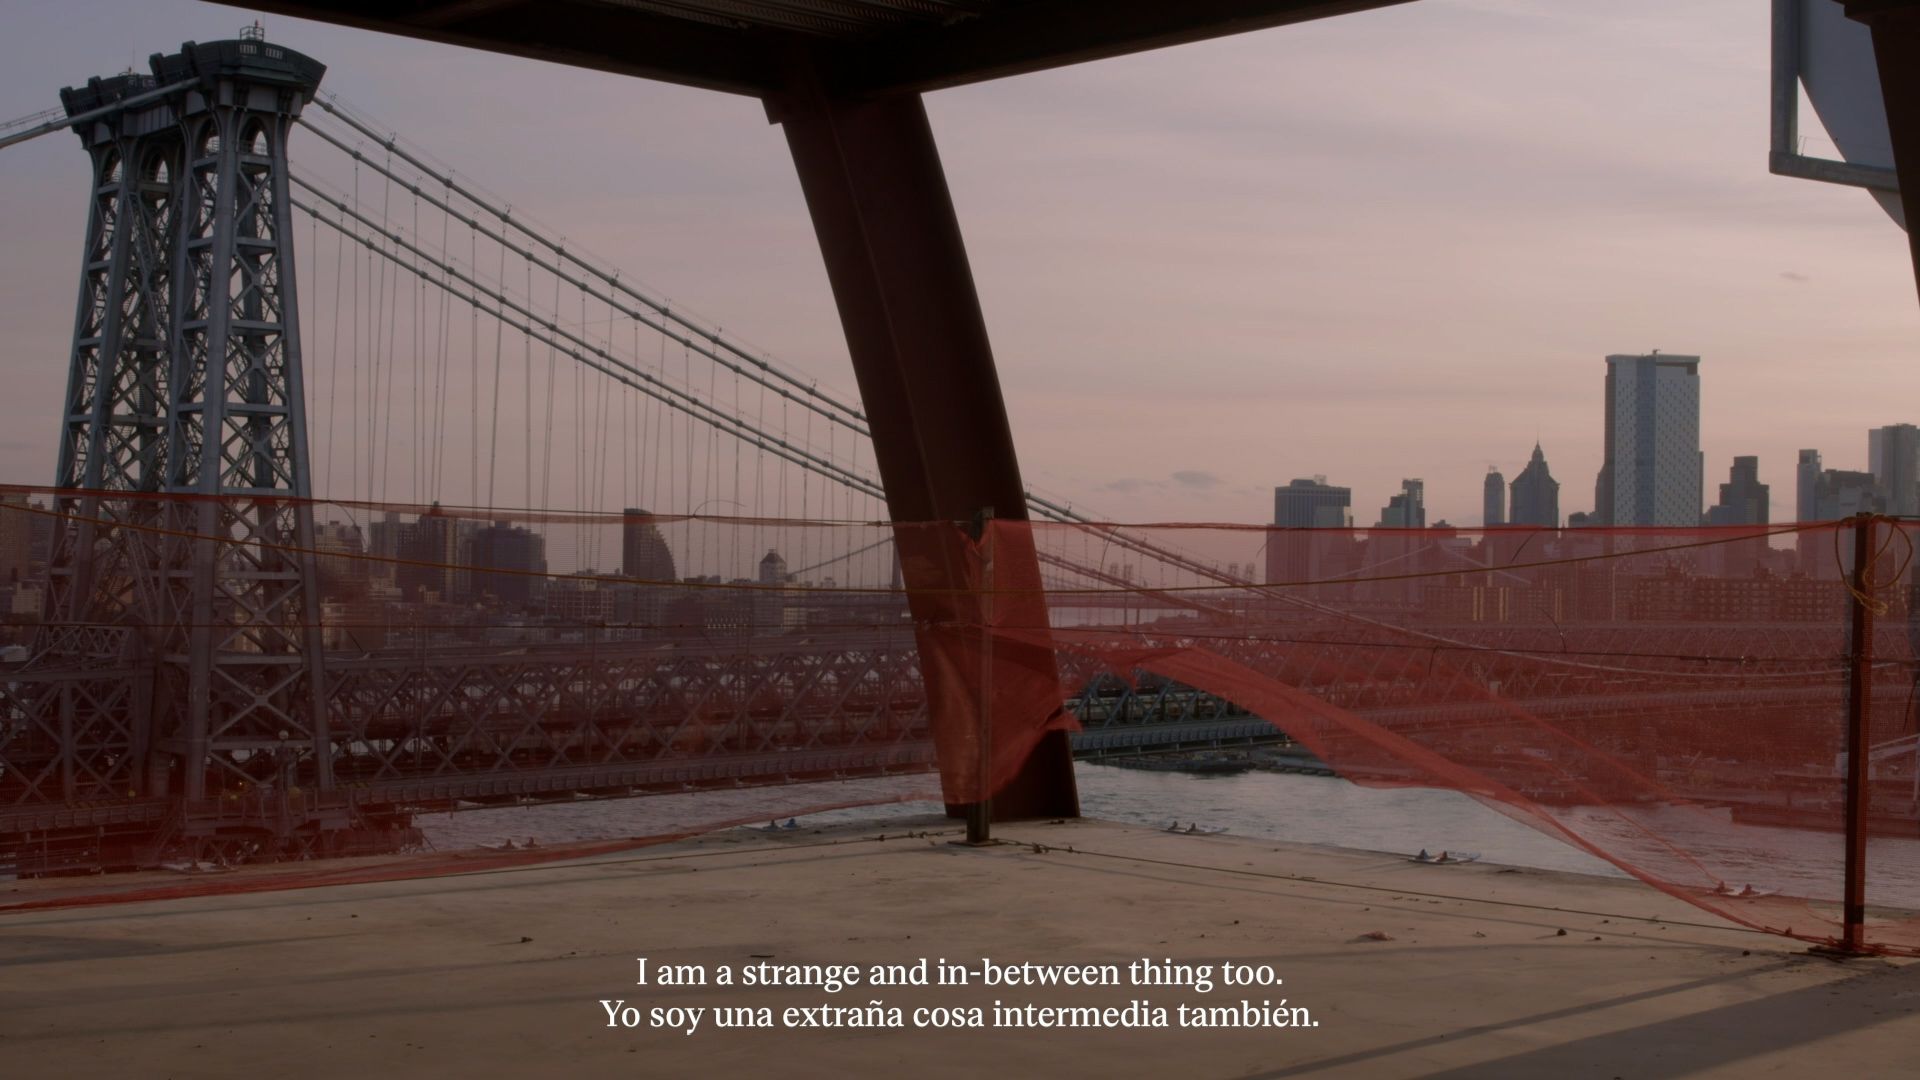 A film still that looks upon the Williamsburg Bridge from behind the orange gauze of a construction site, with a caption in white text at the bottom of the screen which reads: "I am a strange and in-between thing too" in both english and spanish.